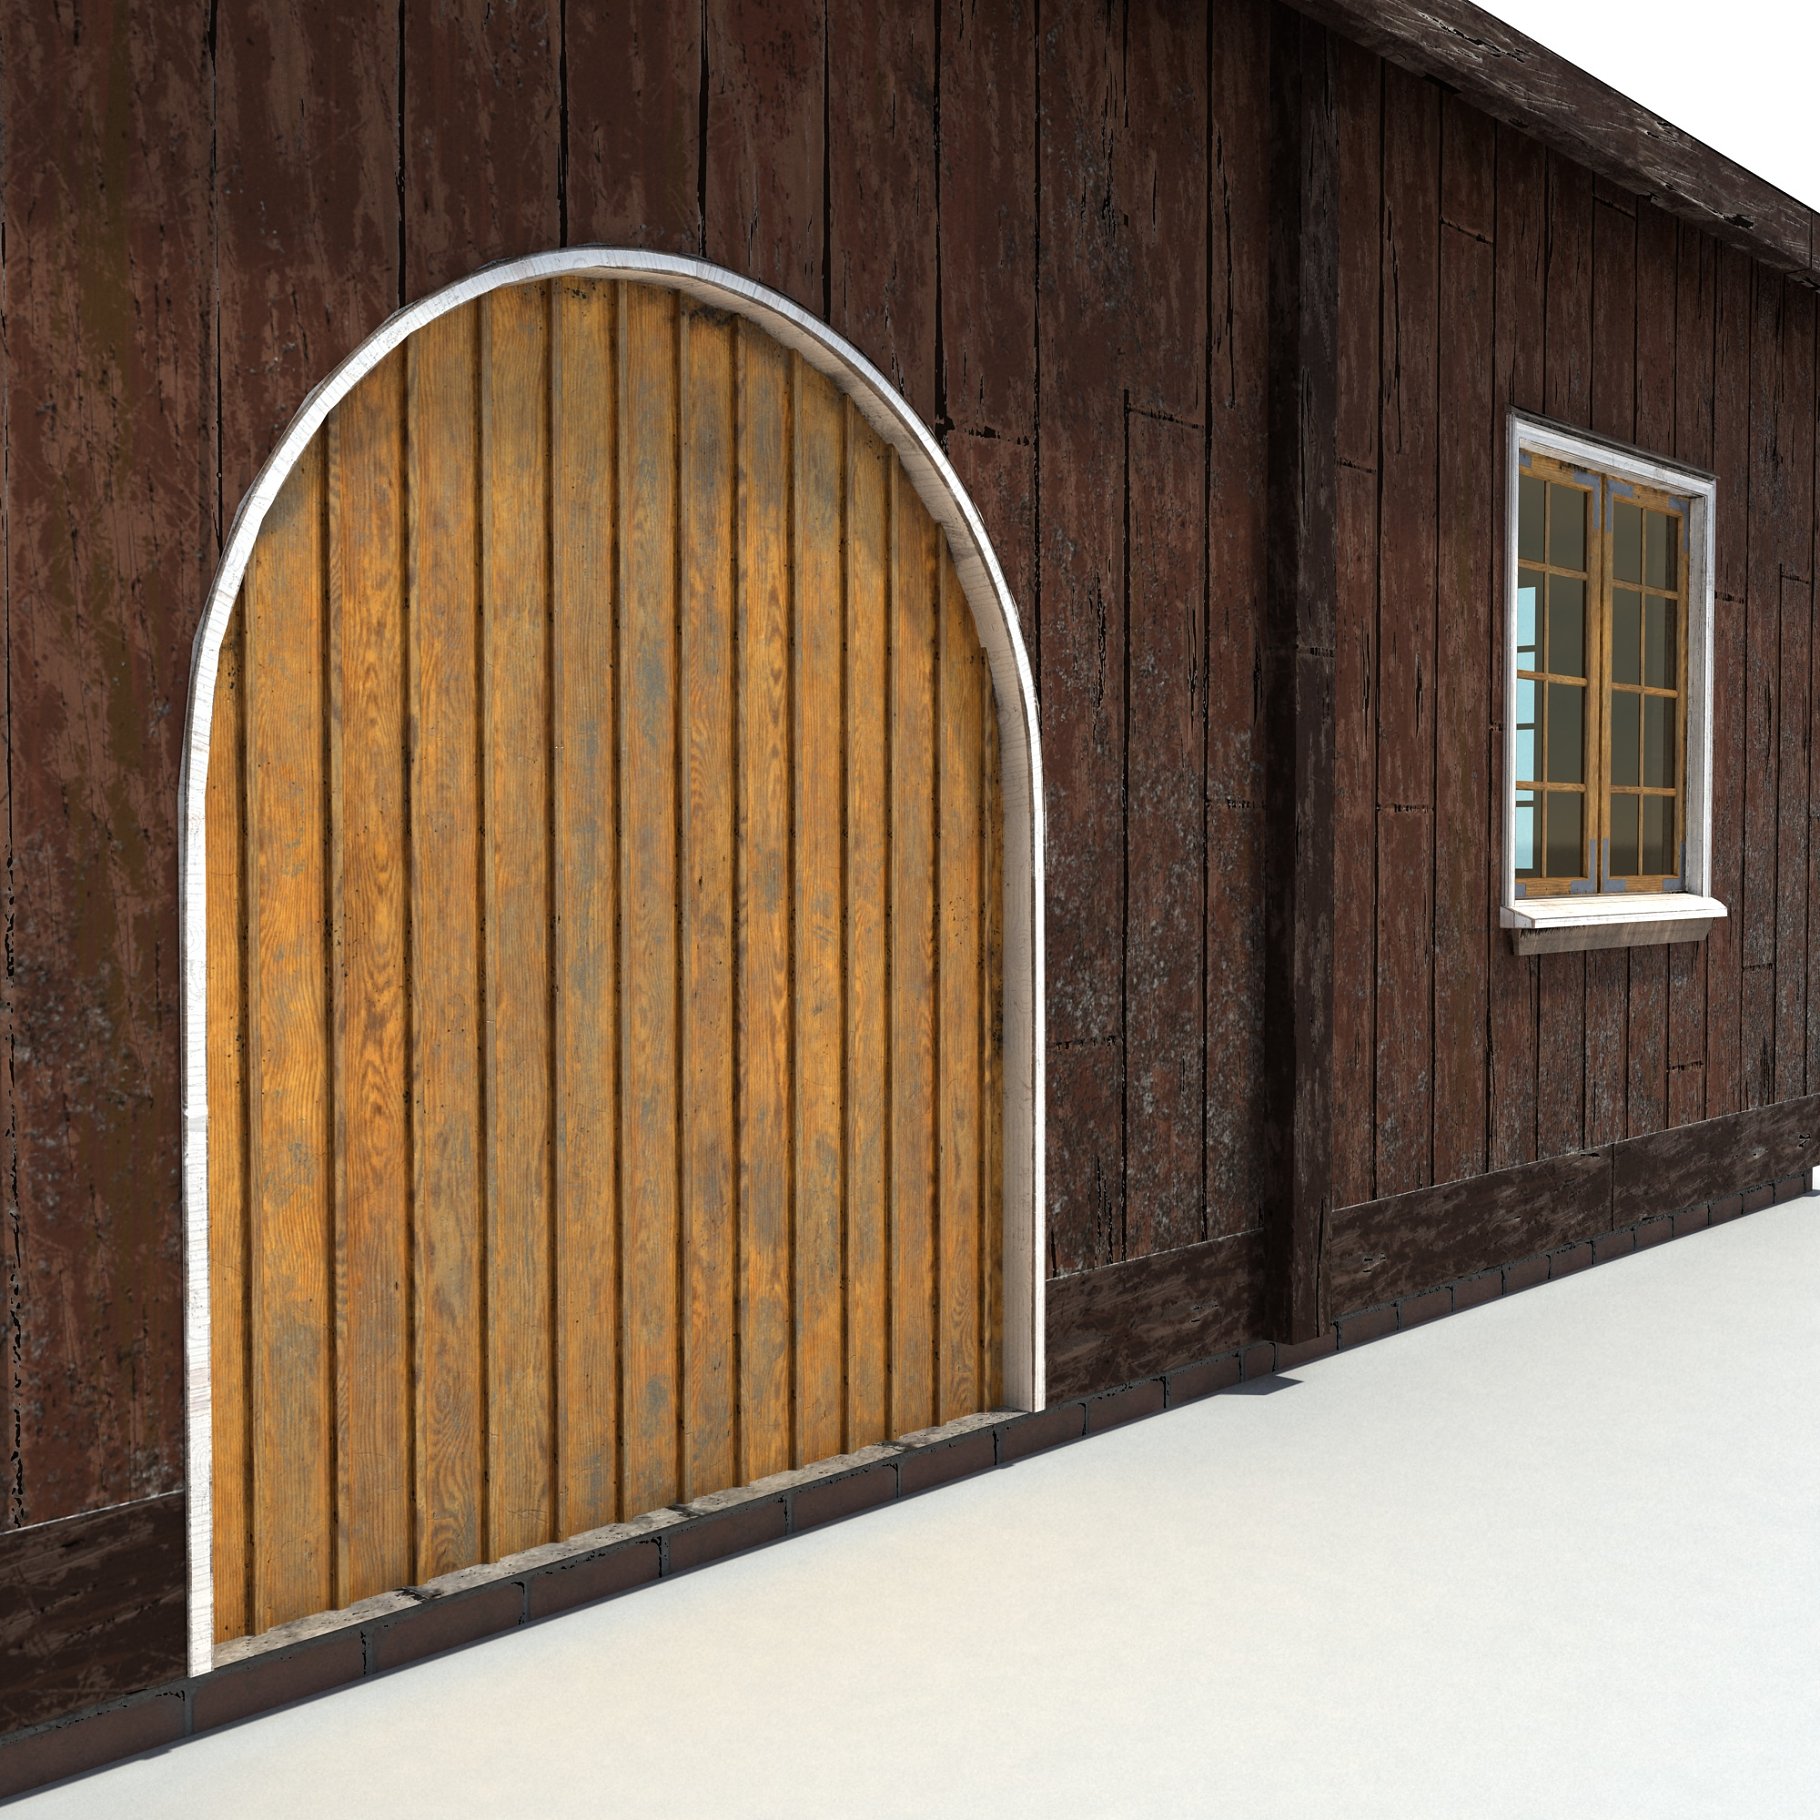 Door of old house low poly in close-up.